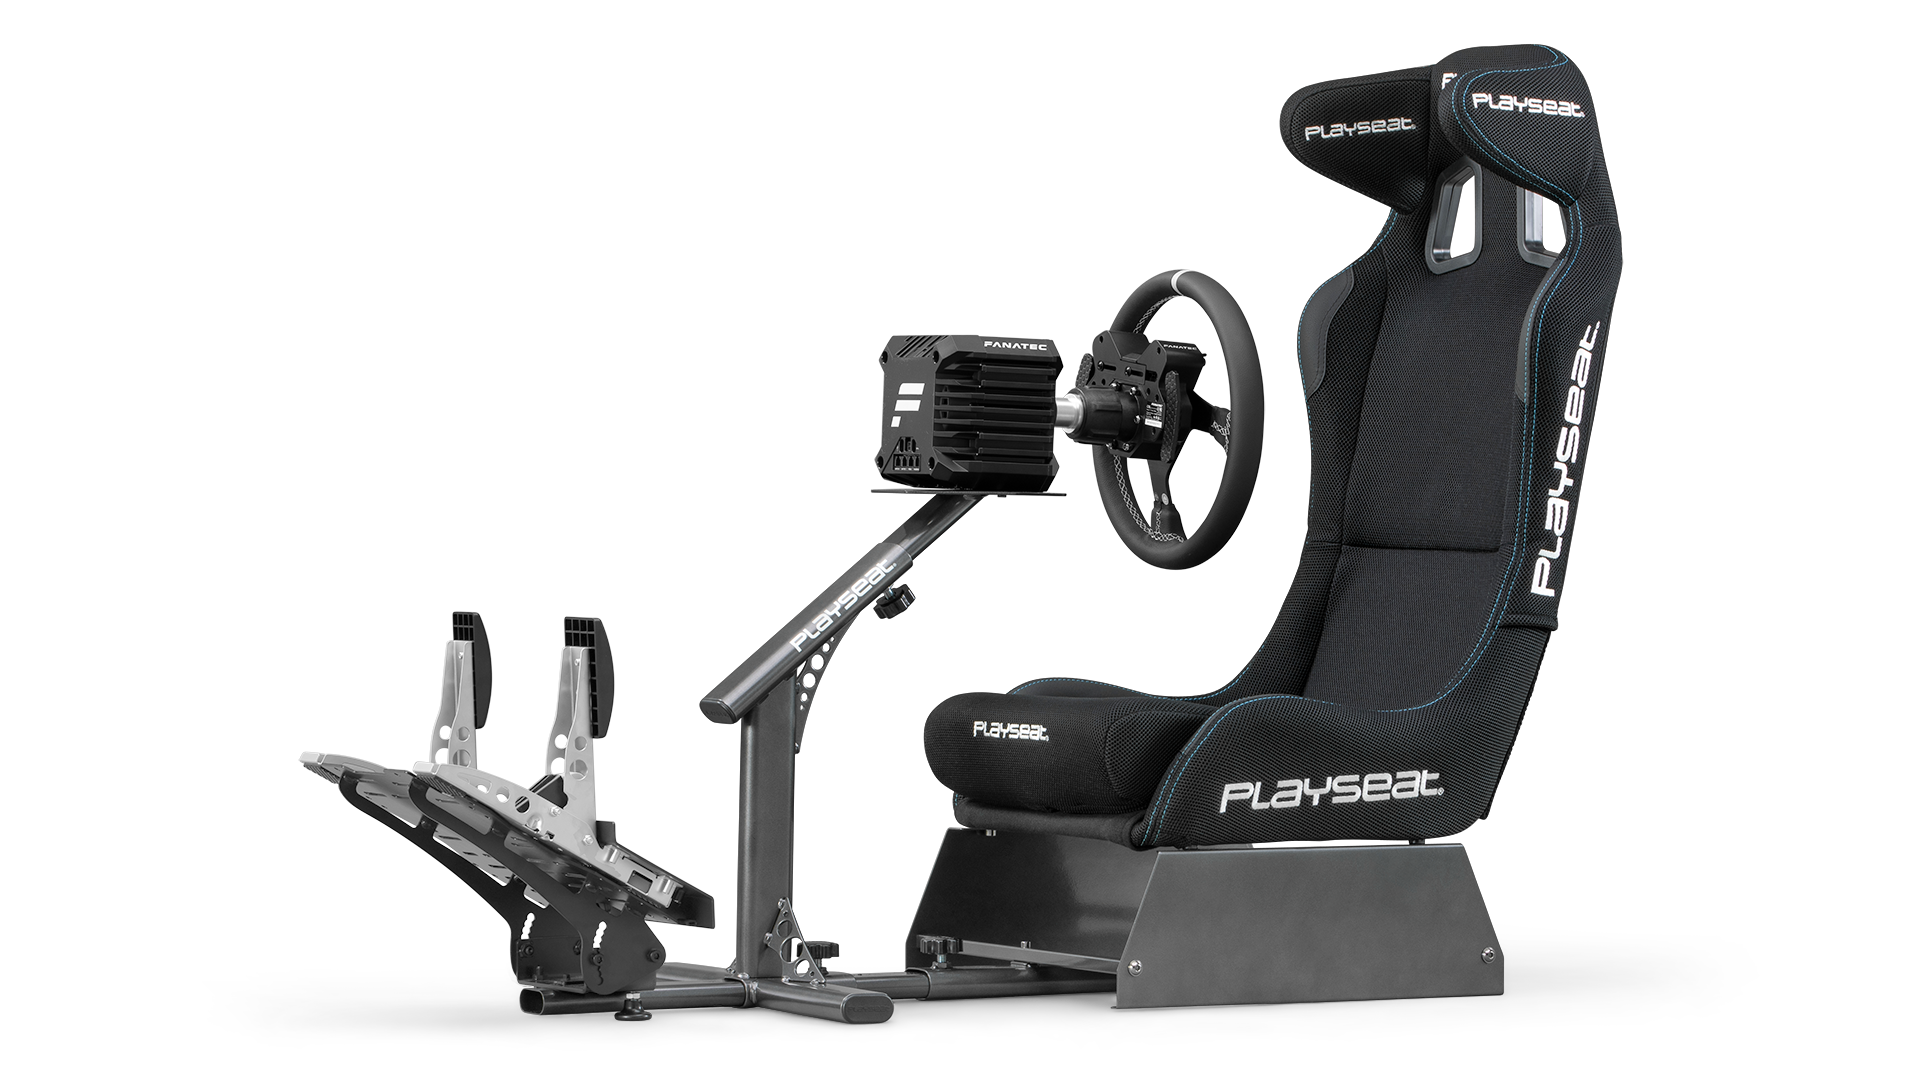 PlayseatStore - Check out @tipotopz simracing setup, including the